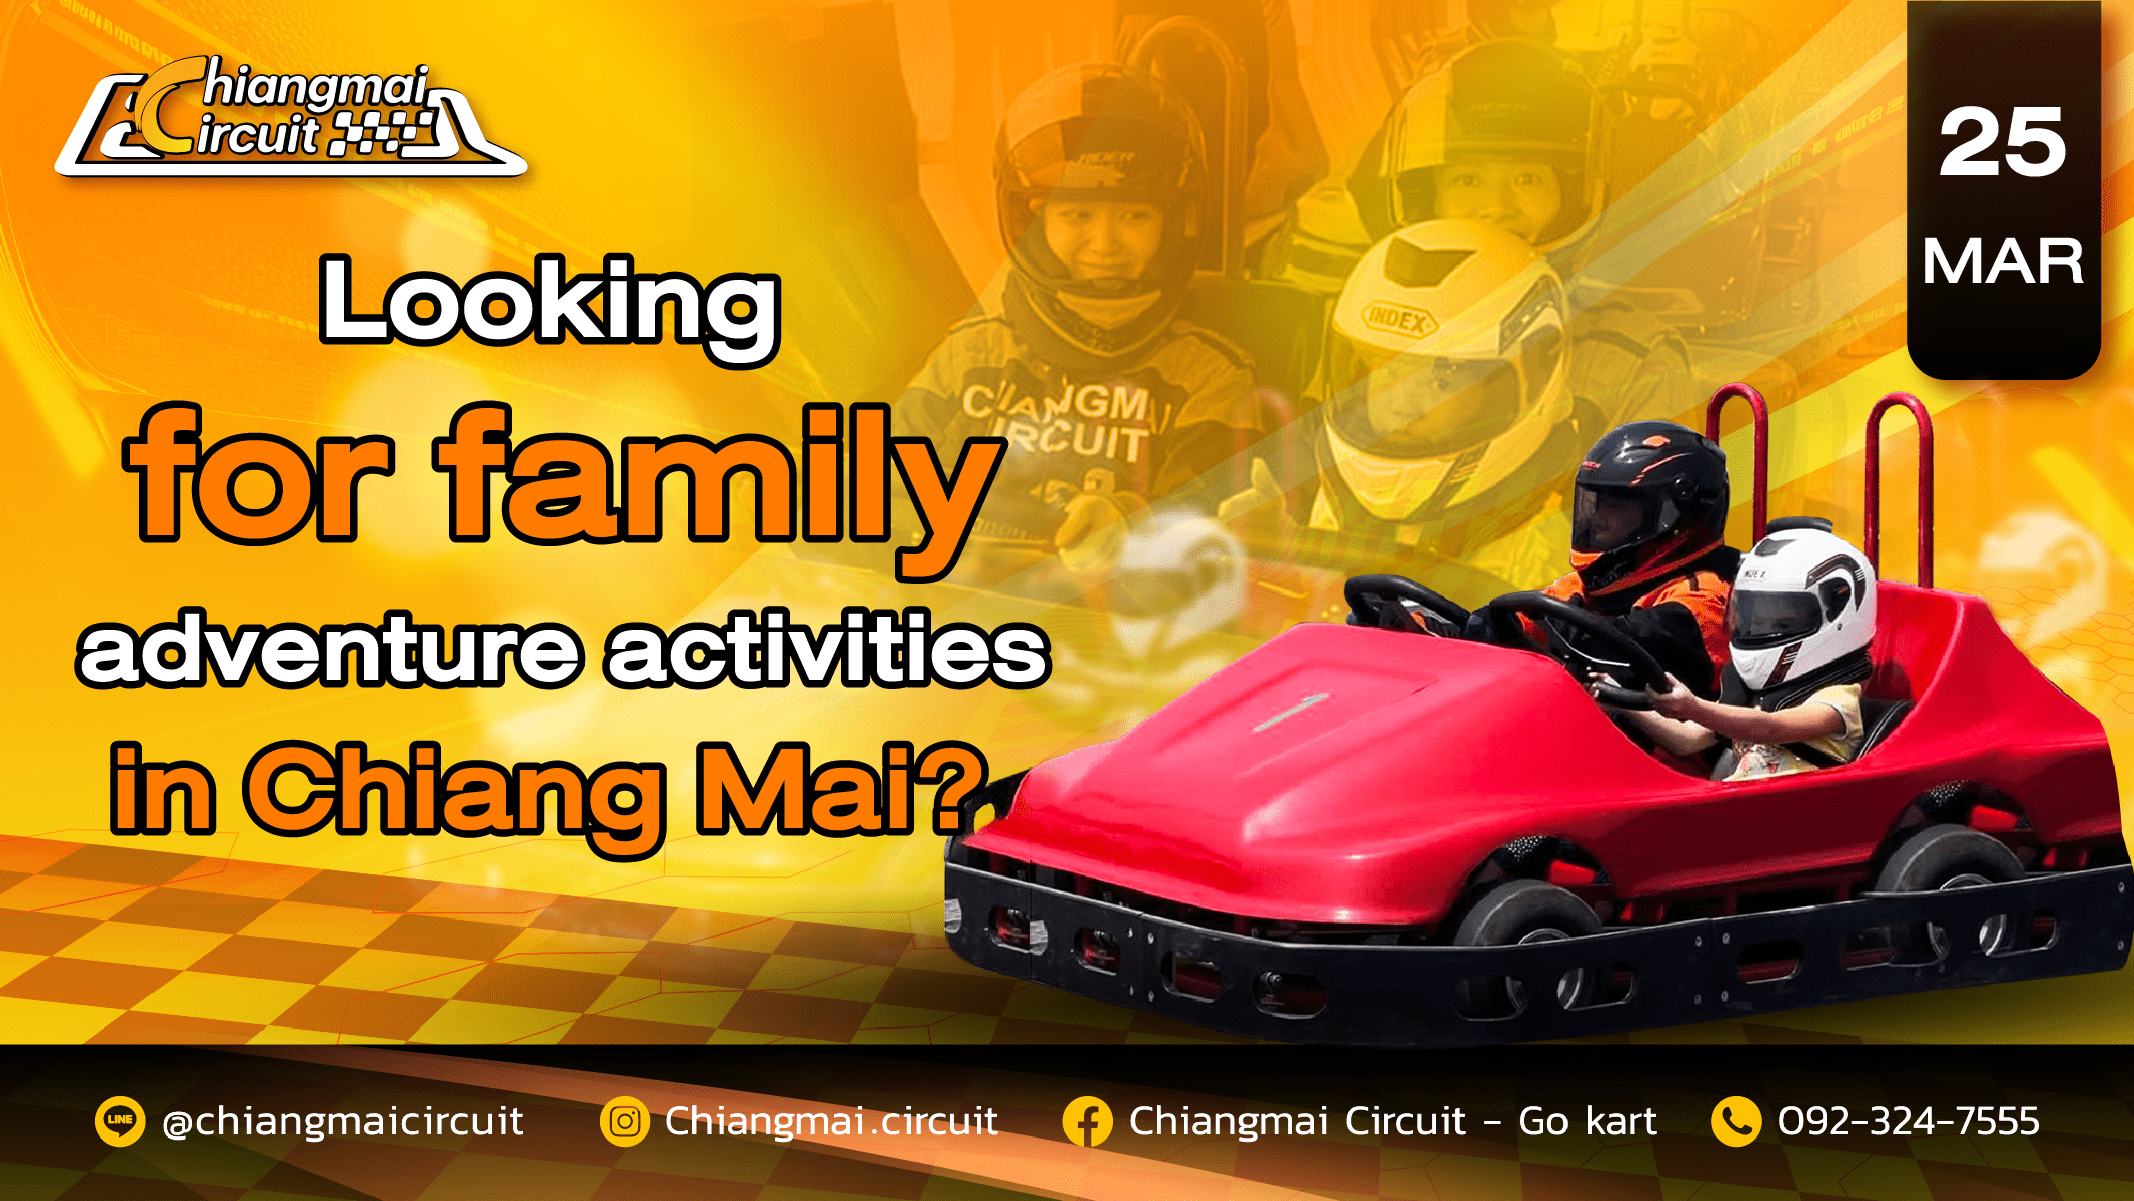 Looking for family-friendly adventure activities in Chiang Mai?